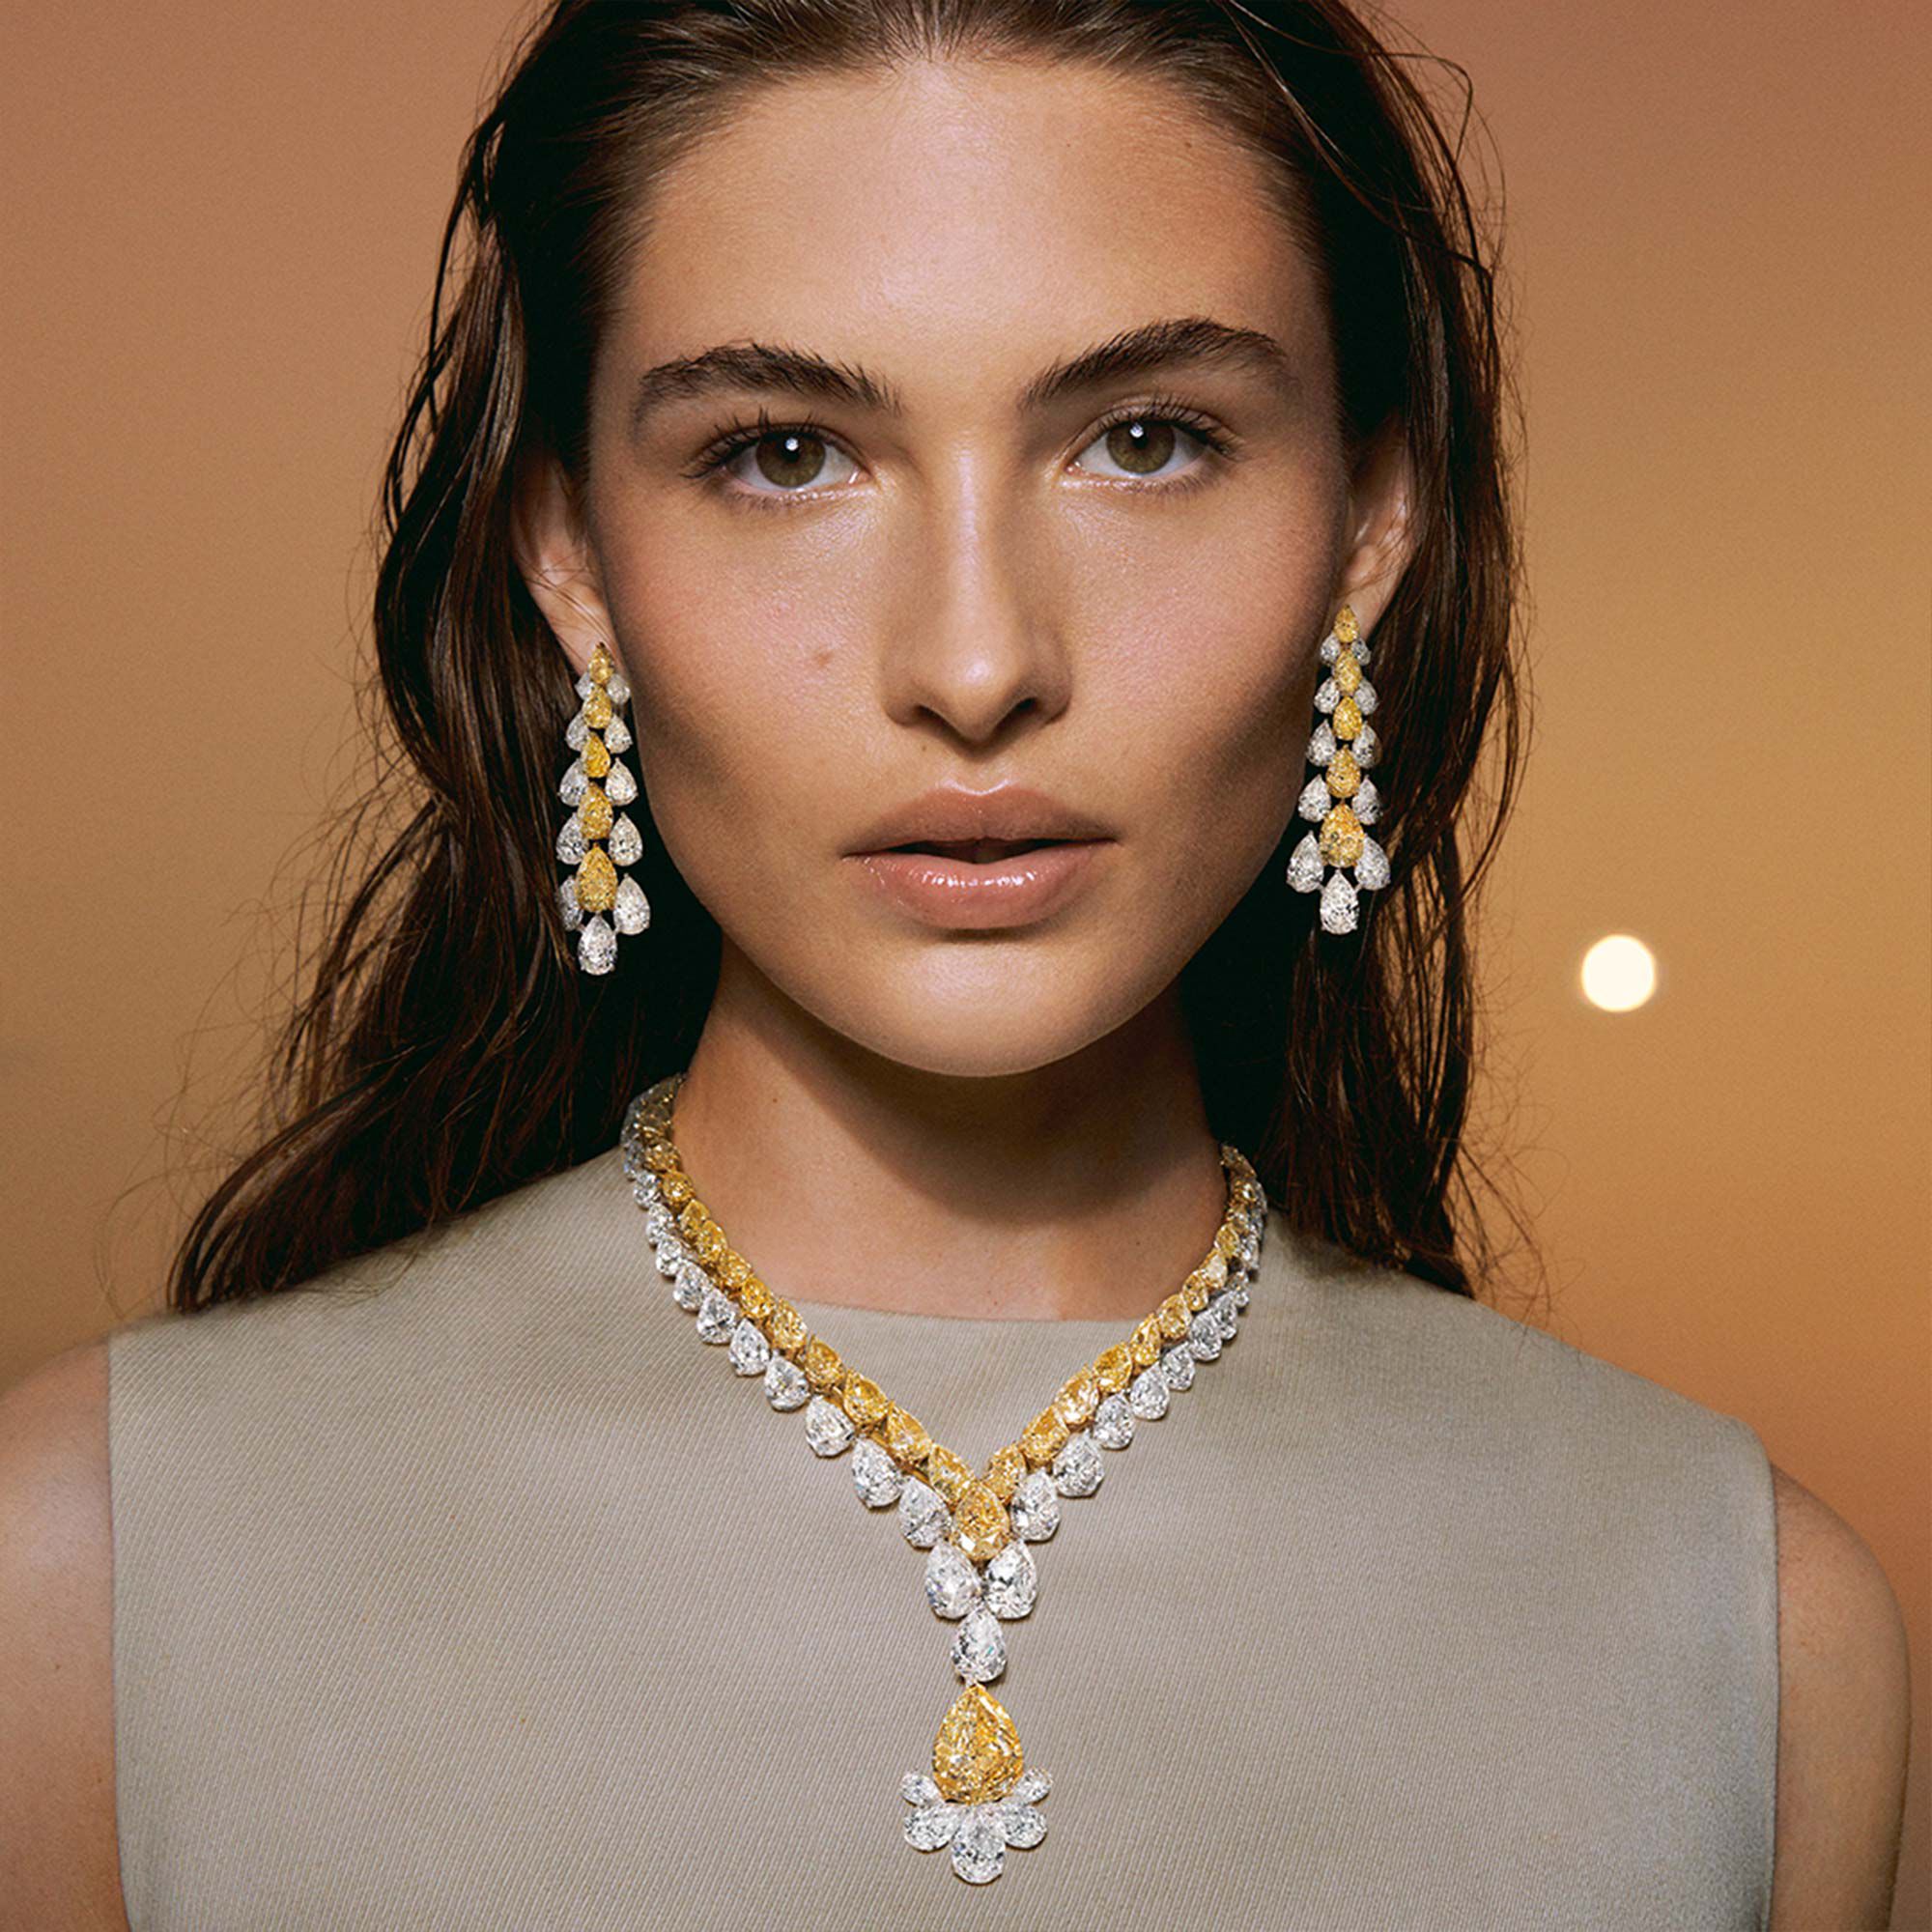 Model wears Graff High Jewellery Yellow and White Diamond Necklace and Earrings